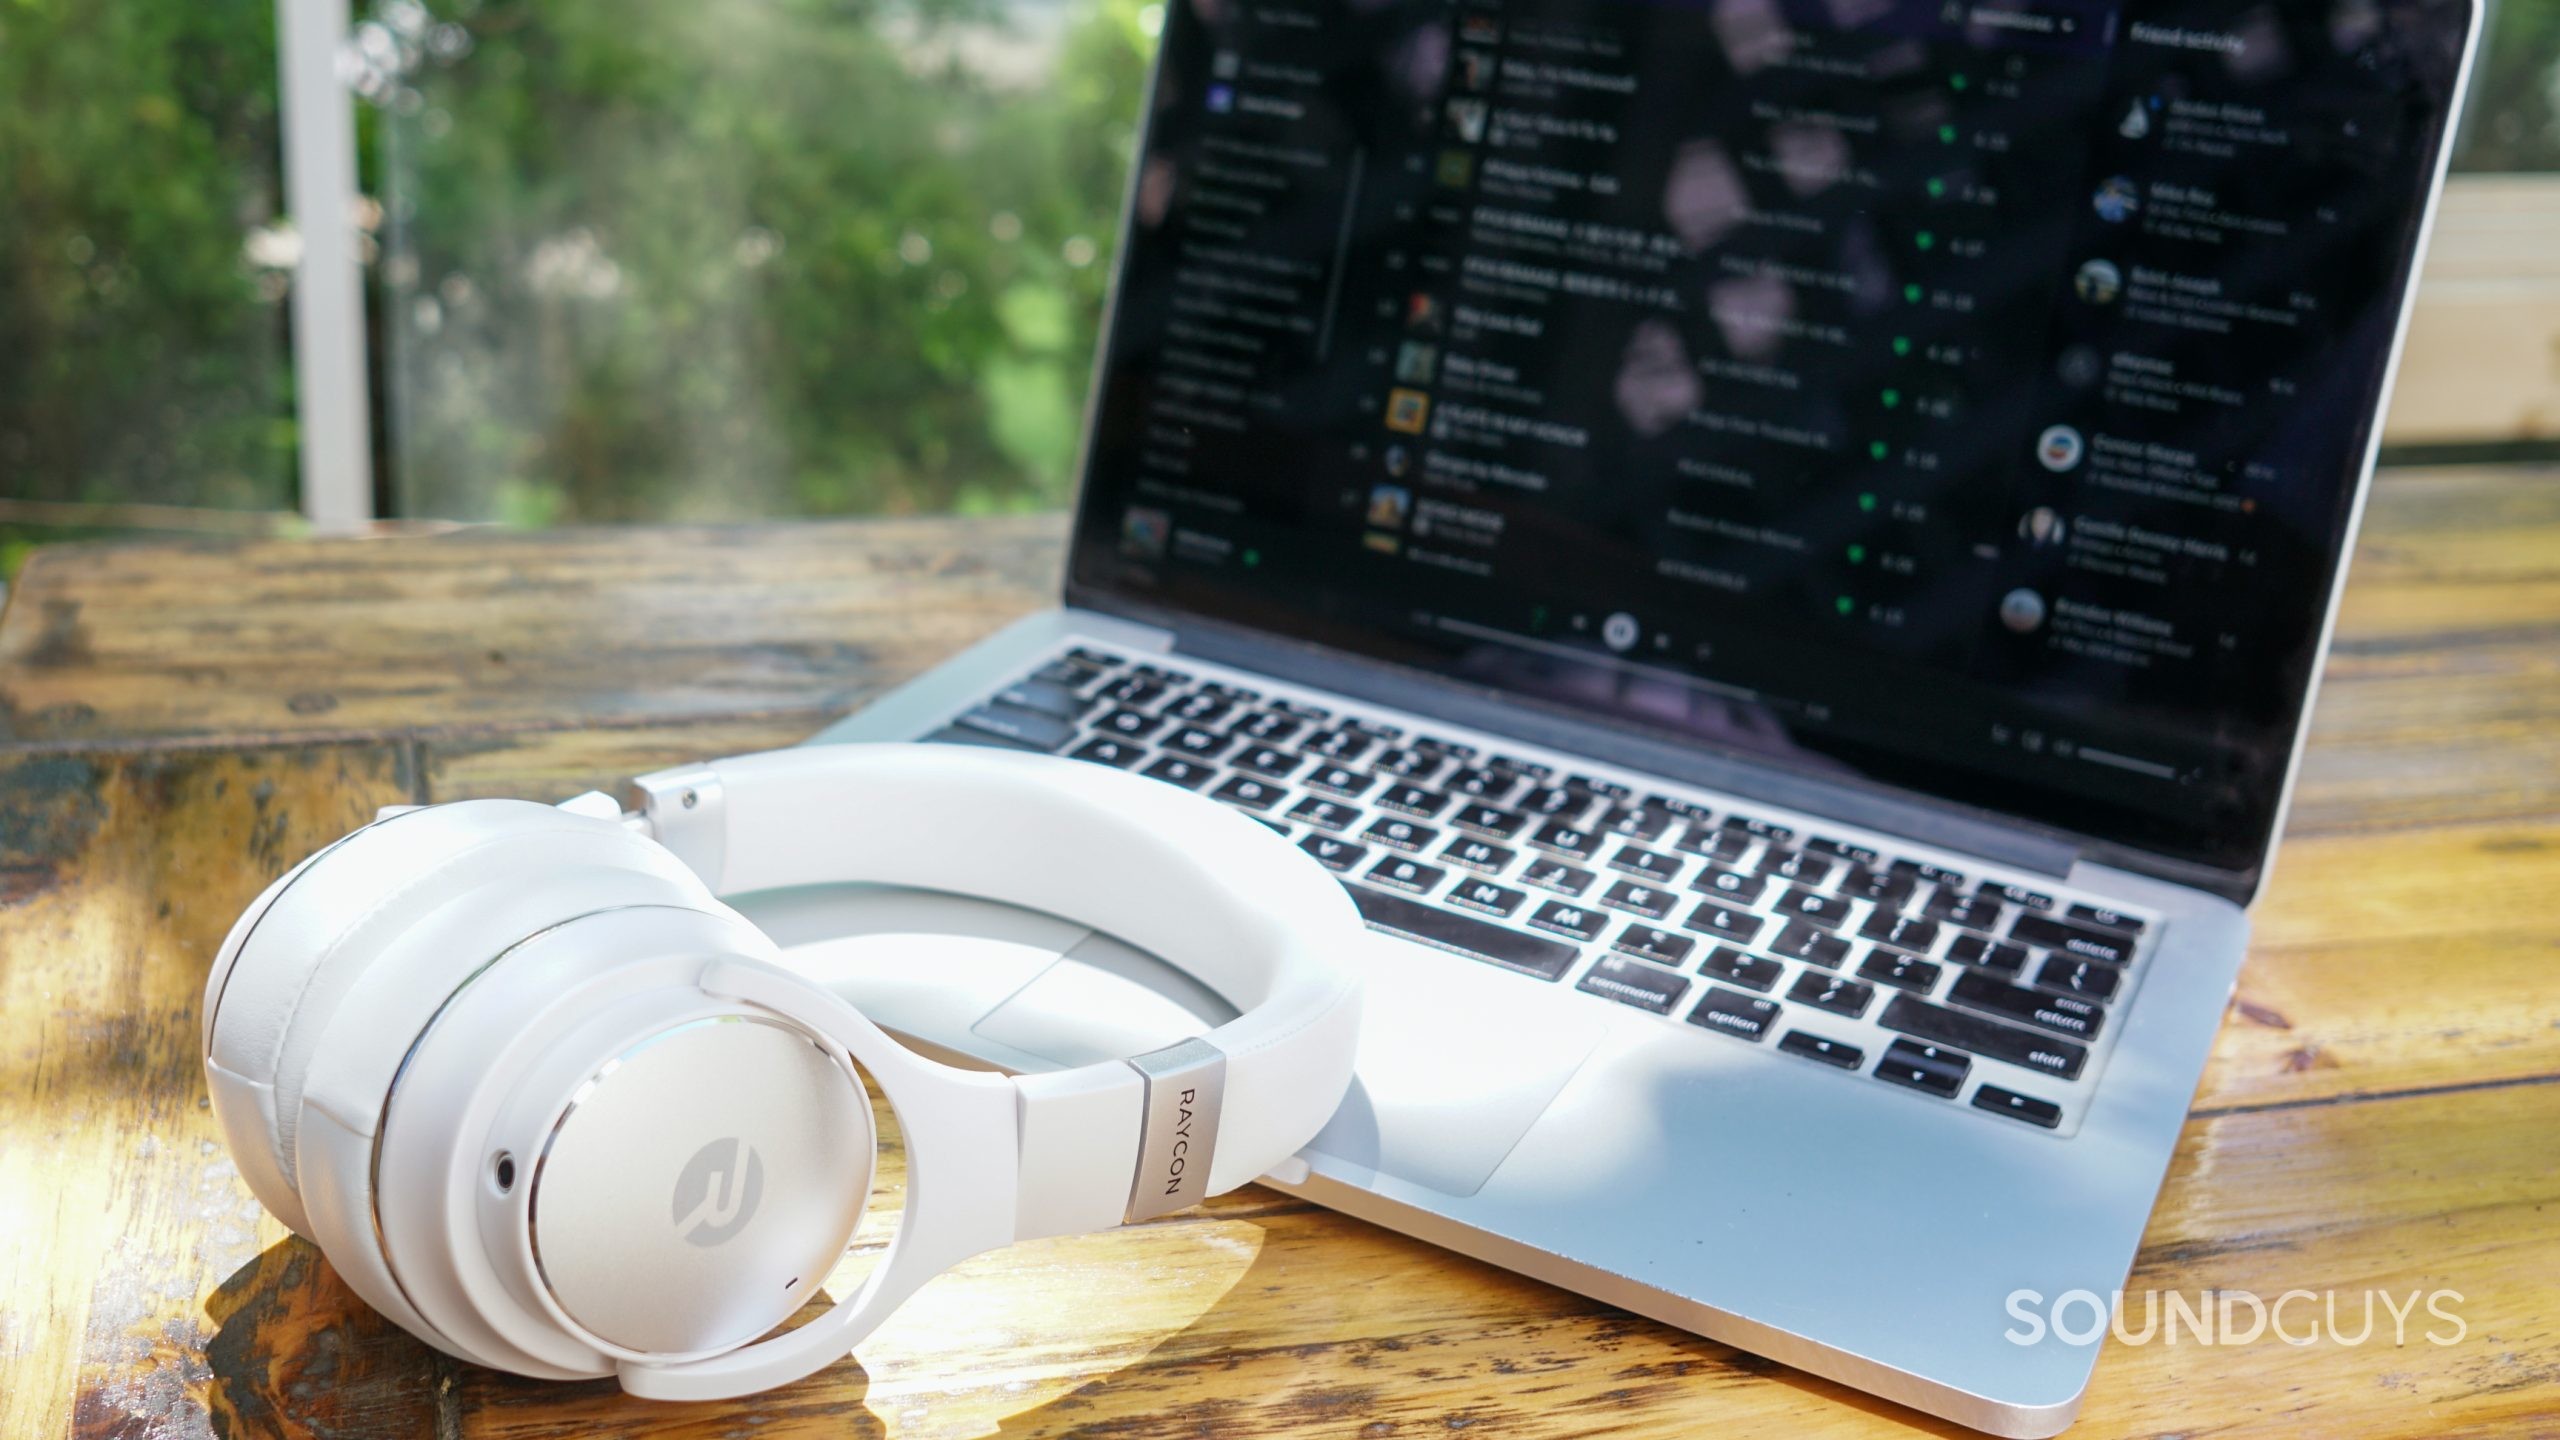 The Raycon Everyday Headphones lay on an Apple MacBook Pro, to which it is connected.